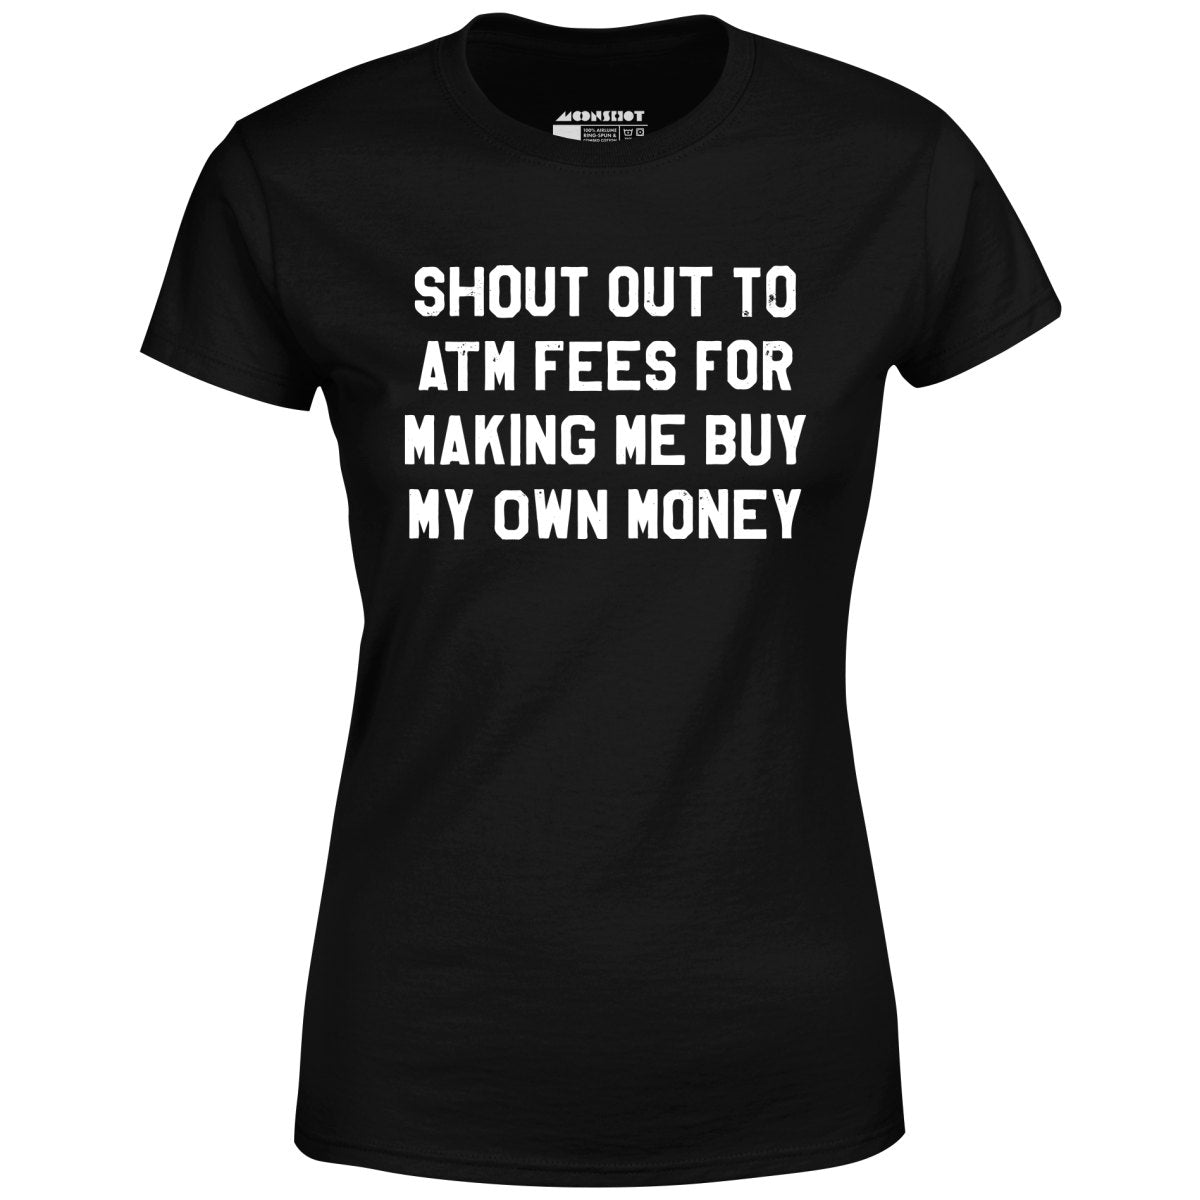 Shout Out to ATM Fees for Making Me Buy My Own Money - Women's T-Shirt